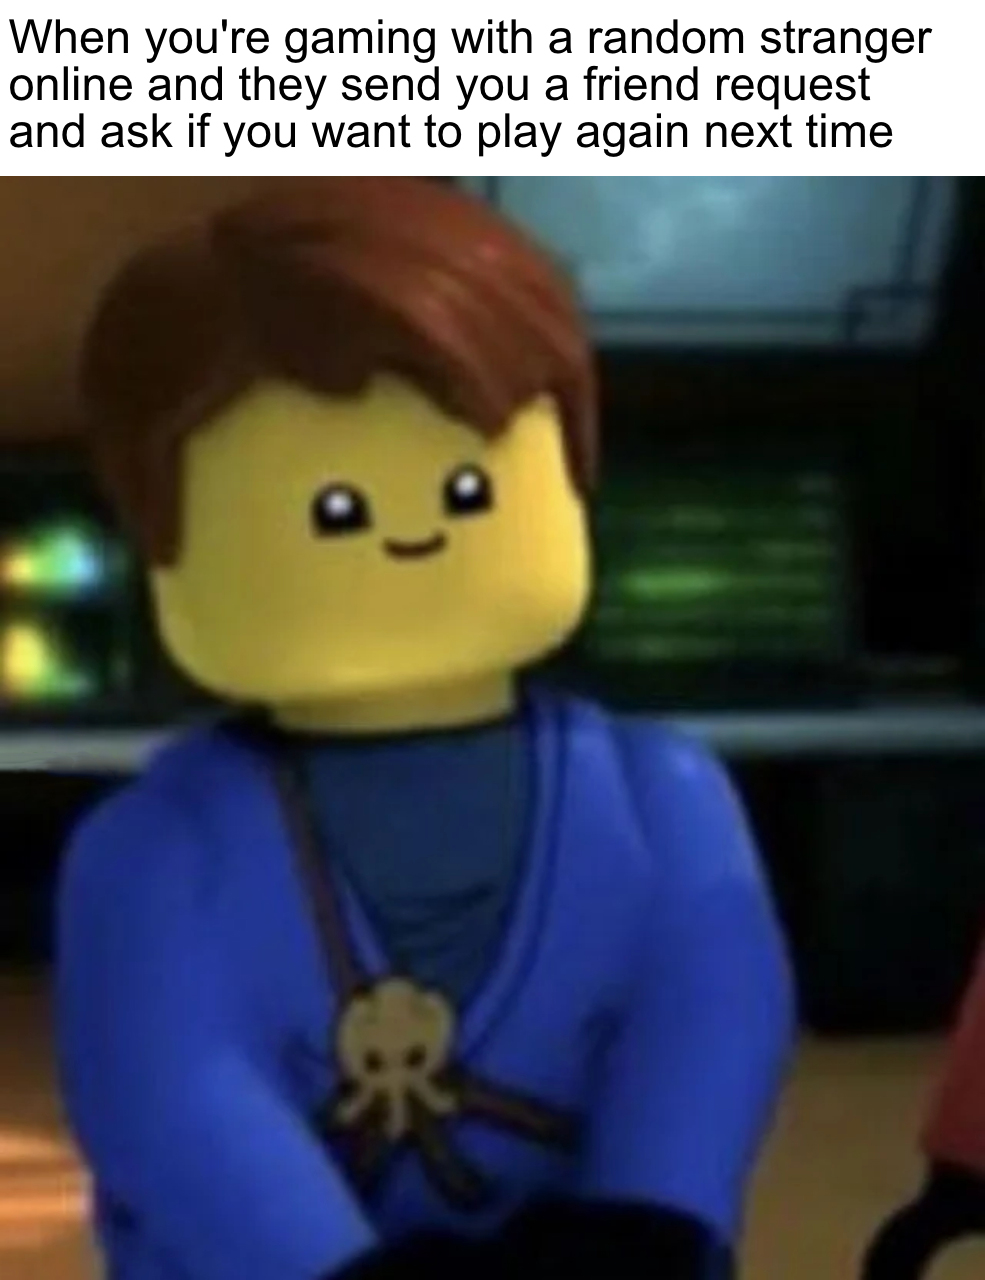 ninjago memes - When you're gaming with a random stranger online and they send you a friend request and ask if you want to play again next time o